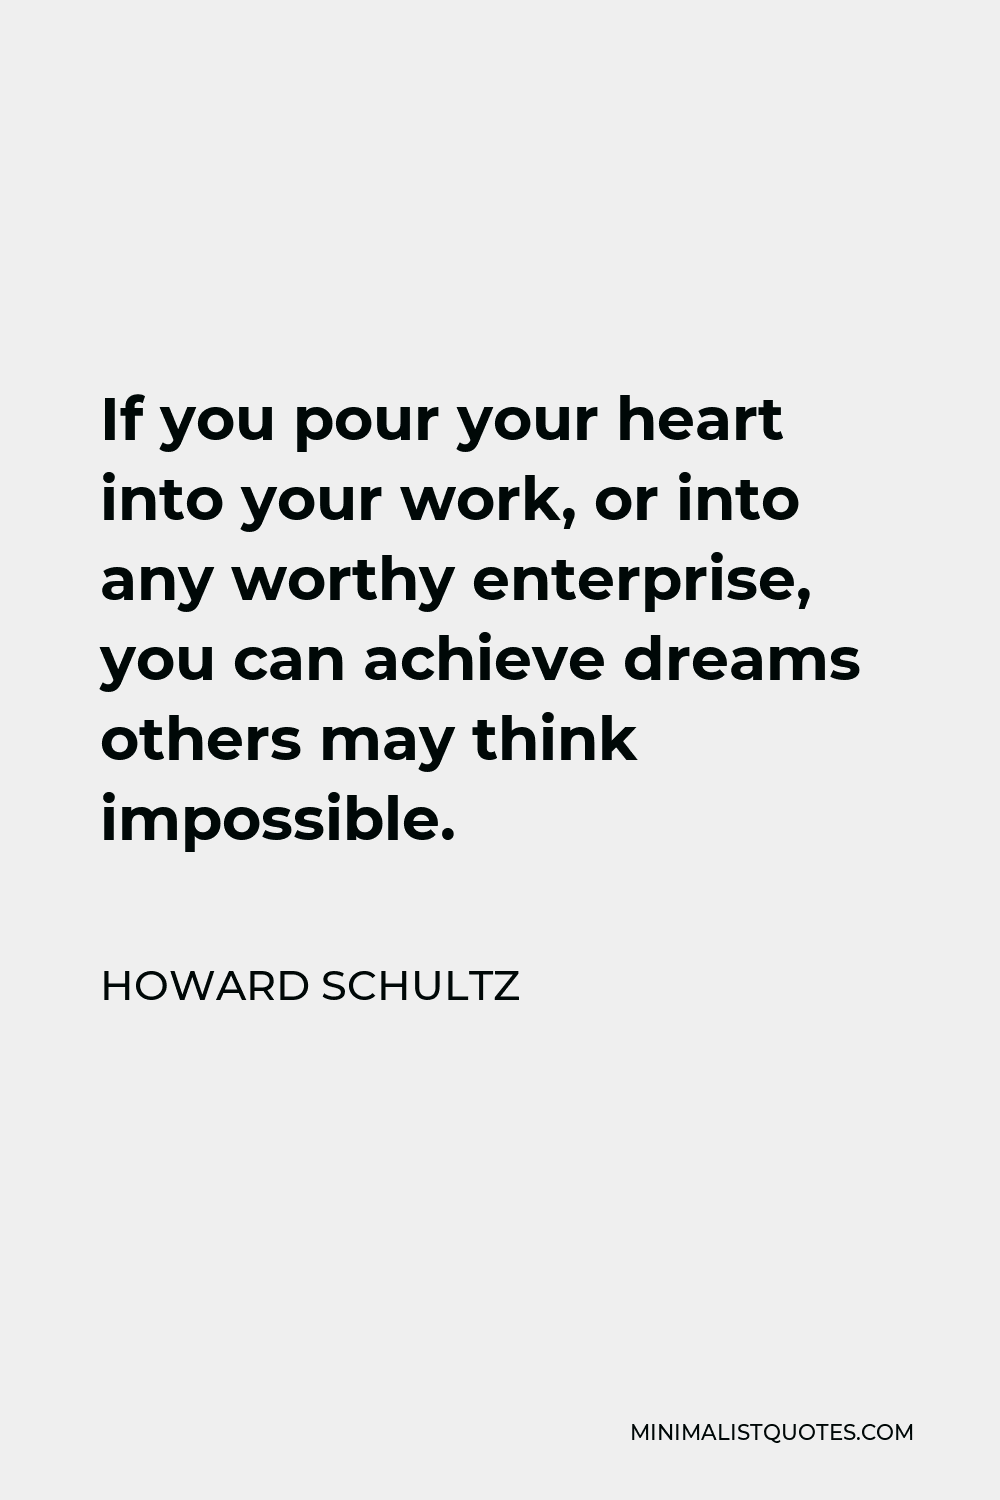 Howard Schultz Quote - If you pour your heart into your work, or into any worthy enterprise, you can achieve dreams others may think impossible.